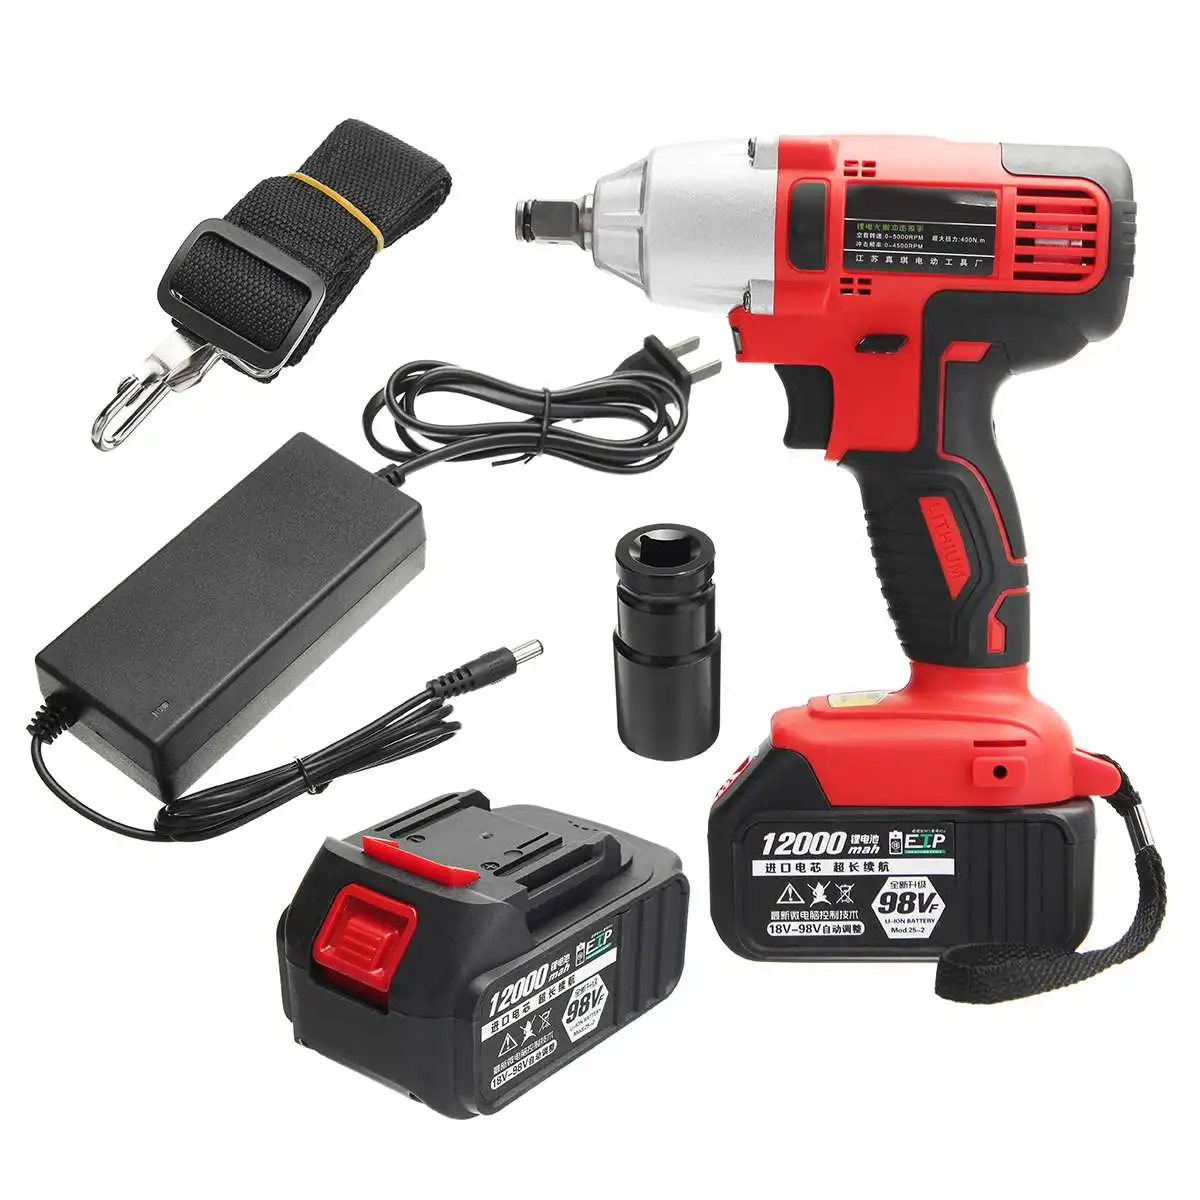 

98V Impact Wrench Brushless Cordless Electric Wrench 400Nm Torque with 2 Pcs Rechargeable Lithium-Ion Battery Power Tools